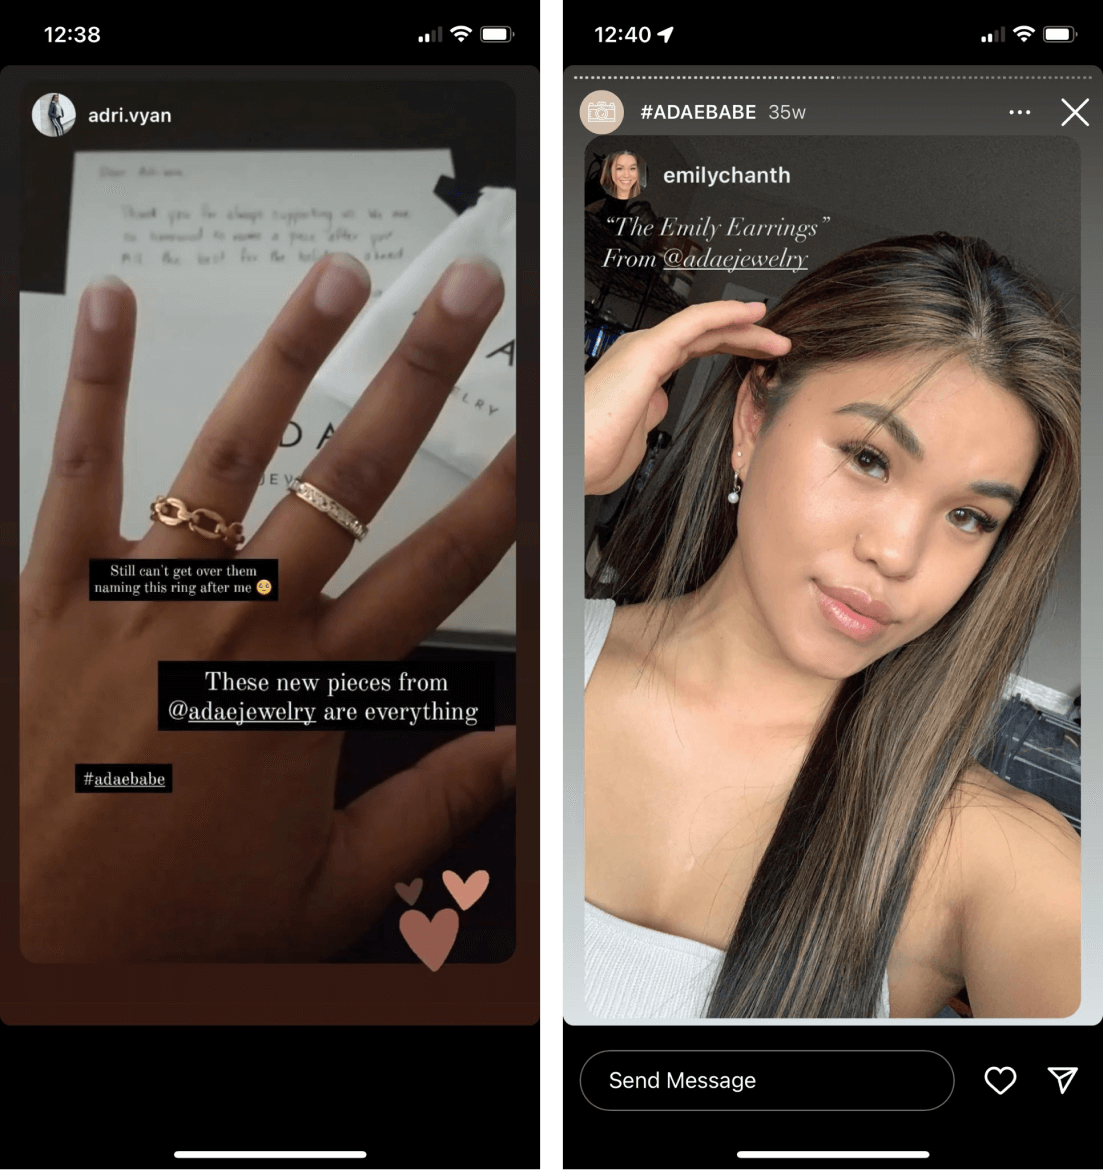 2 screenshots of Instagram stories from customers that ADAE reposted. The first shows a hand with 2 rings on it. There are text boxes around a gold chain ring that say: Still can’t get over them naming this ring after me. These new pieces from @adaejewelry are everything. #ADAEBABE. The second image shows a woman smiling and holding her hair behind her ear to show a dangling pearl earring. The text reads: “The Emily Earrings” from @adaejewelry.